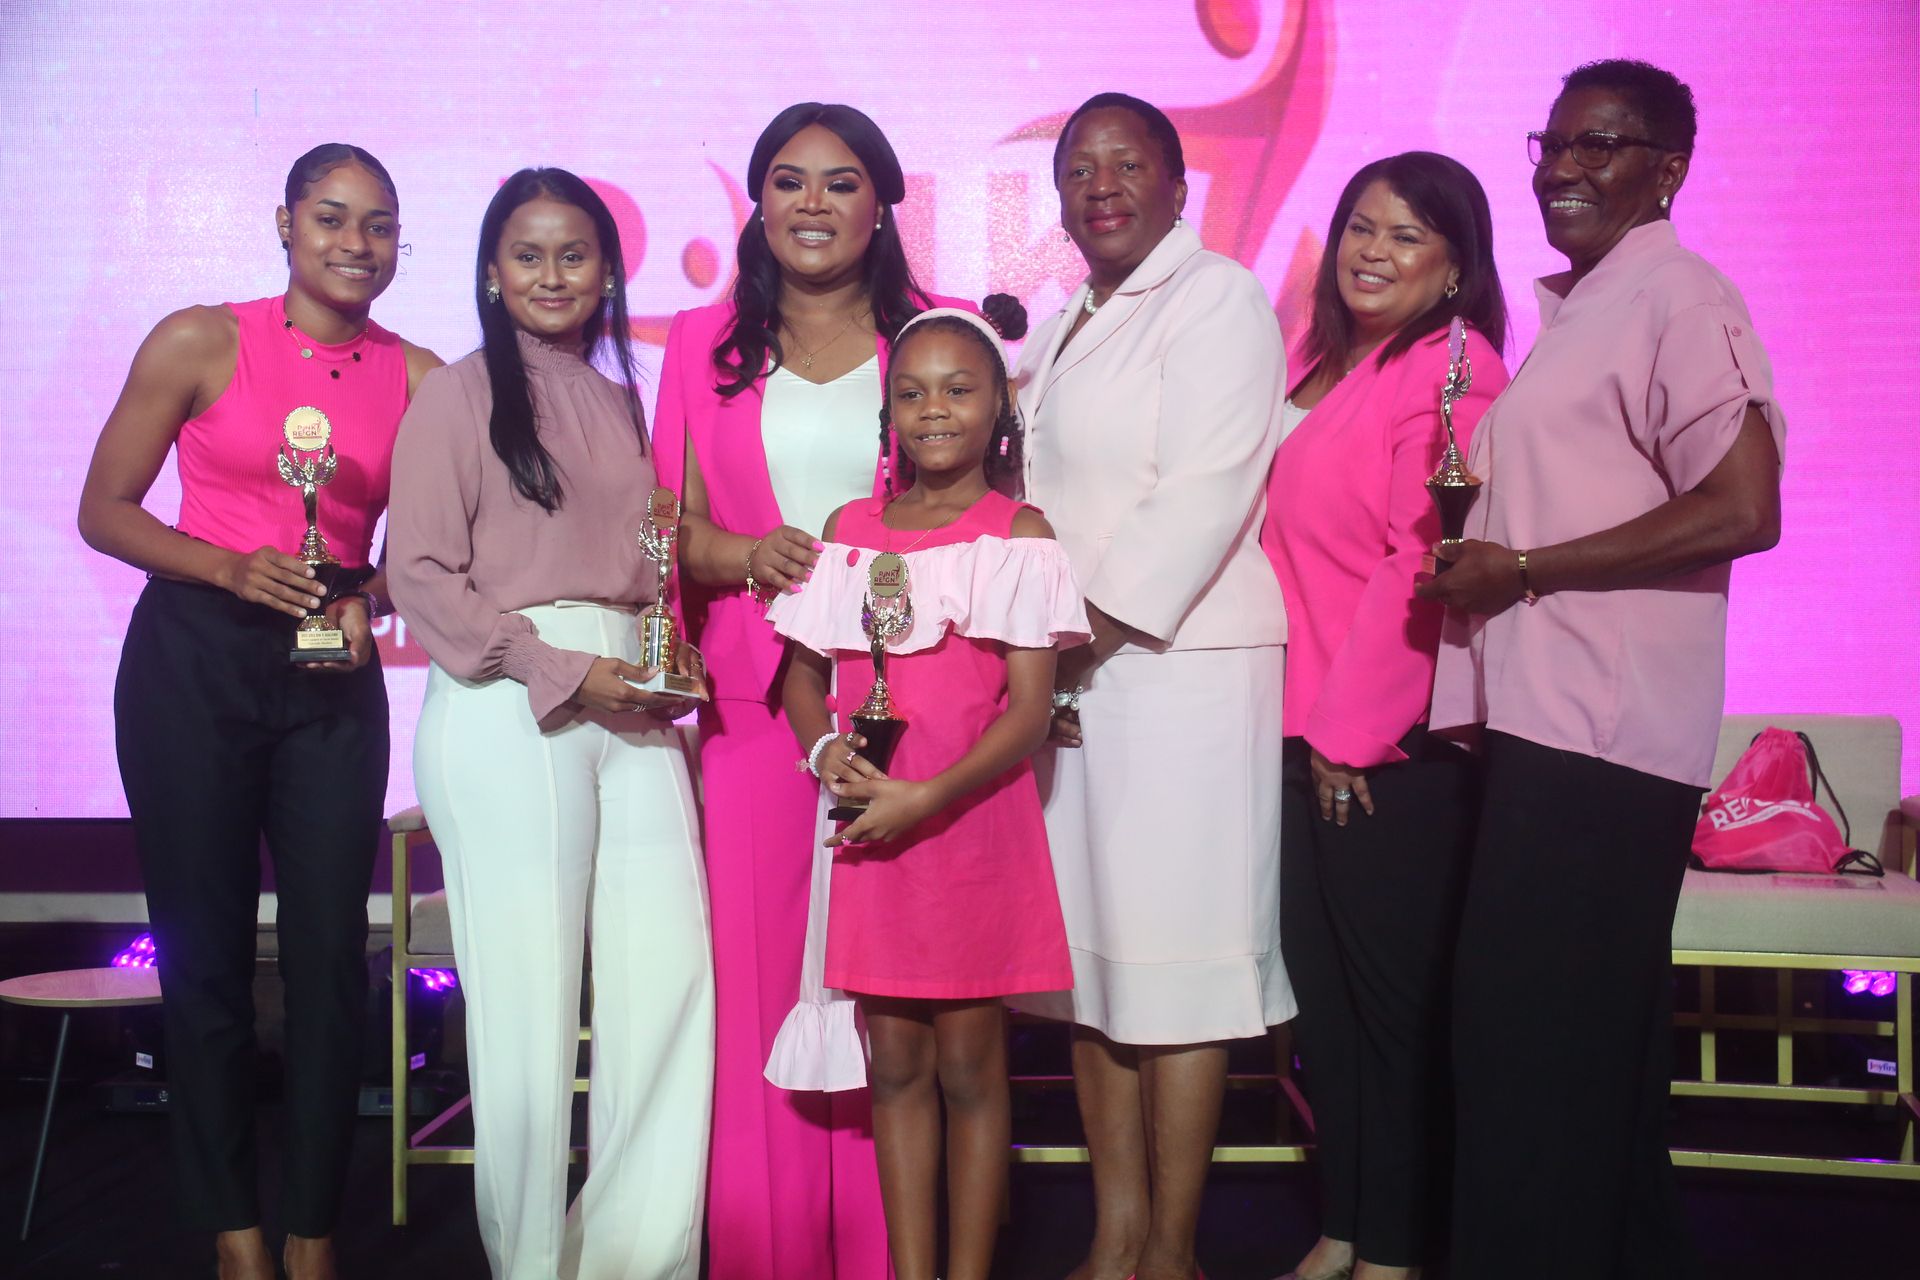 Minister of Sport and Community Development Shamfa Cudjoe-Lewis third from left, Minister of Planning and Development Pennelope Beckles-Robinson and US Embassy political assistant/attorney-at-law Debra Coryat-Patton pose for a photo with the most engaged on social media, left Gabrielle Barkley, winner of the Pink Reign 2023 Ariana Jeannine Parma, youngest participant Arya Joseph and most senior participant Ingrid Muriell during the Ministry of Sport and Community Development launch of the 2024 Pink Reign Campaign yesterday at Hilton Trinidad and Conference Centre, Port-of-Spain.  SHIRLEY BAHADUR (Image obtained at guardian.co.tt)